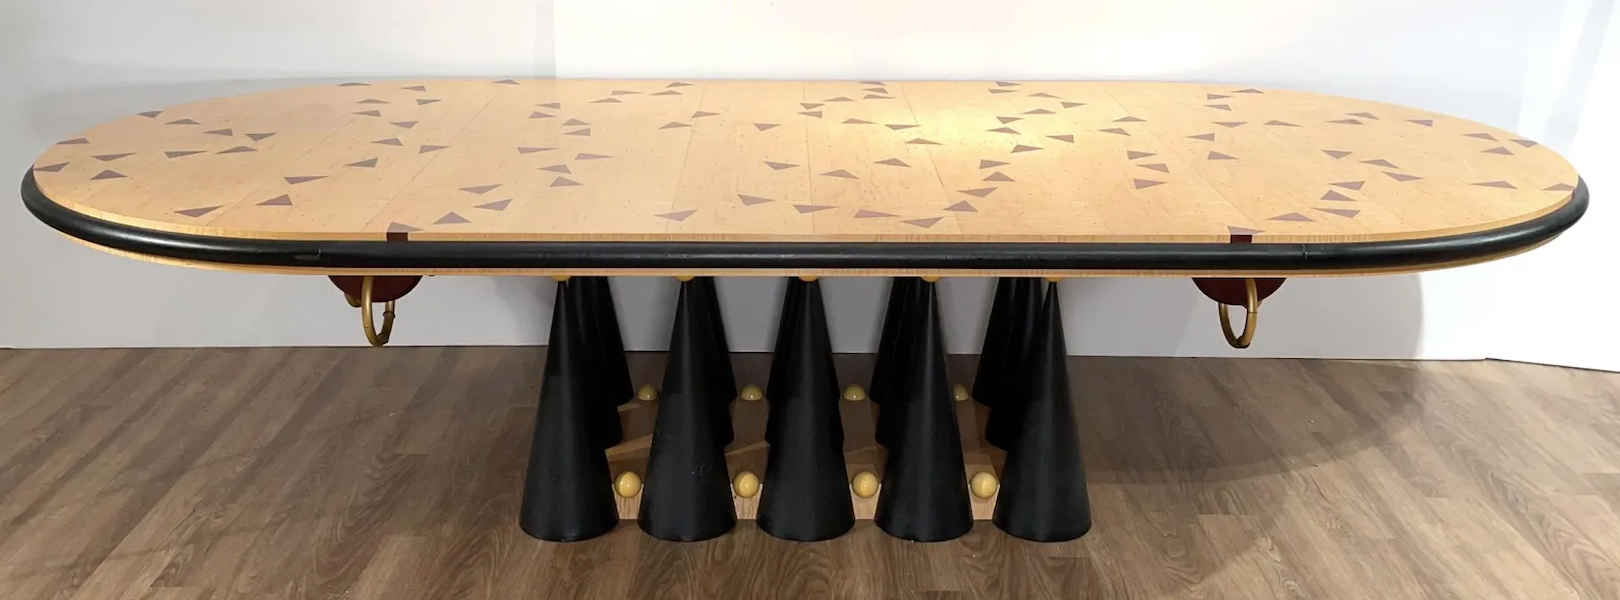 This important 1988 Wendell Castle dining table with inlay purpleheart triangles and dots handily bested its high estimate to earn $57,000 plus the buyer’s premium in May 2021. Image courtesy of Neue Auctions and LiveAuctioneers.